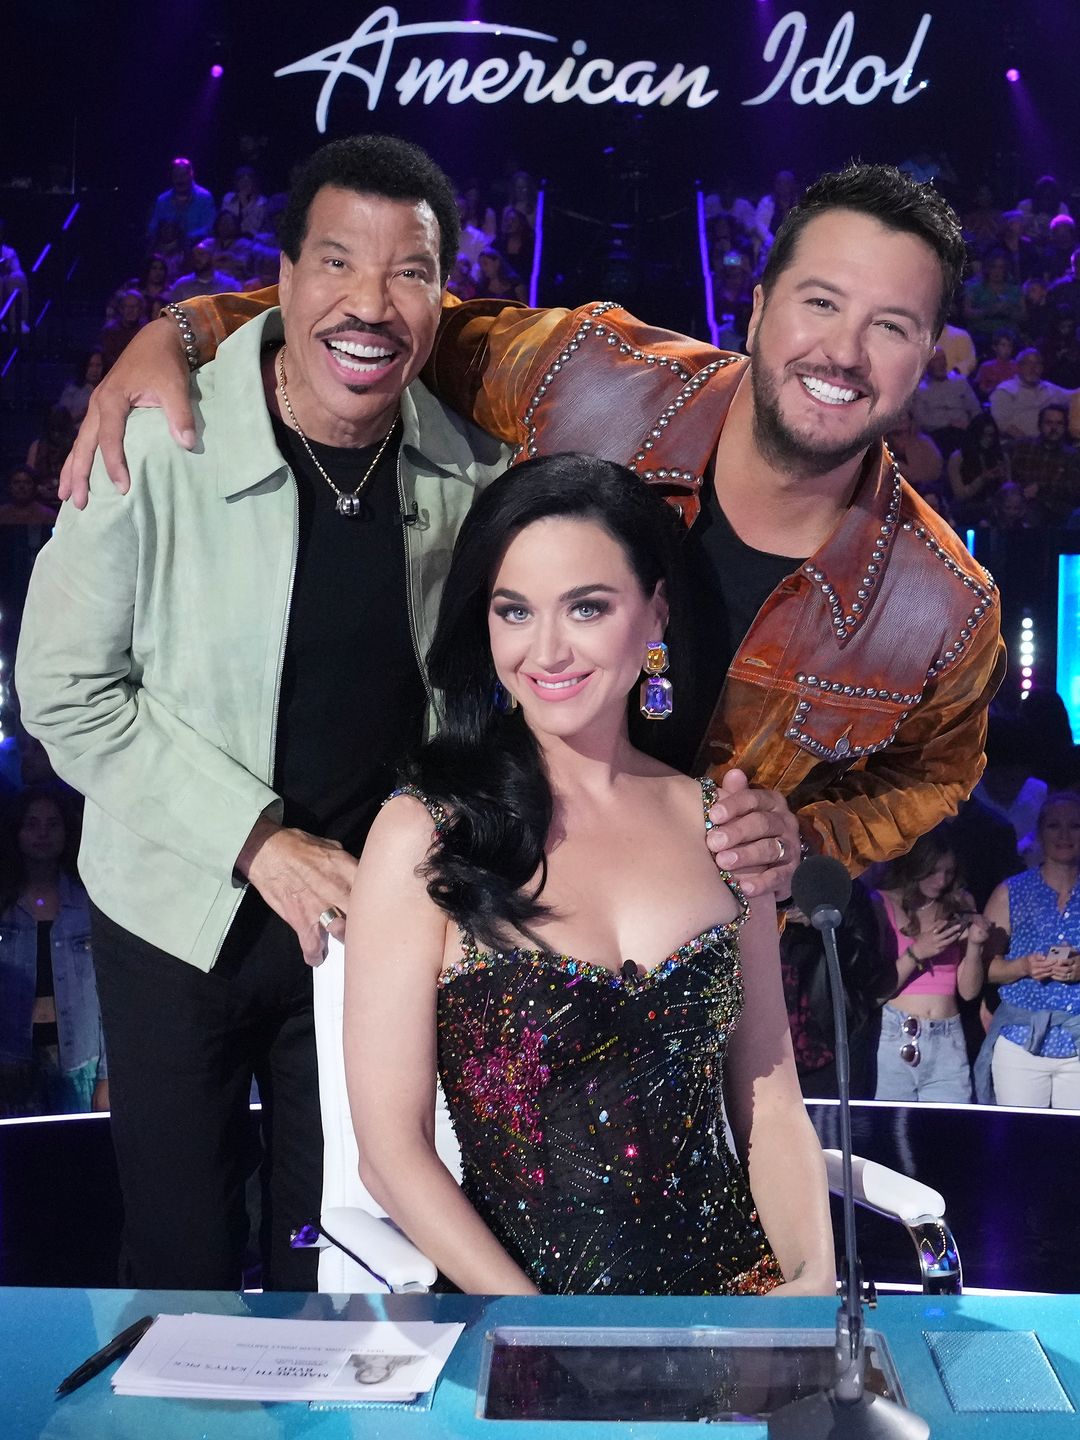 The singer smiling with her fellow Idol judges Lionel and Luke stood behind her